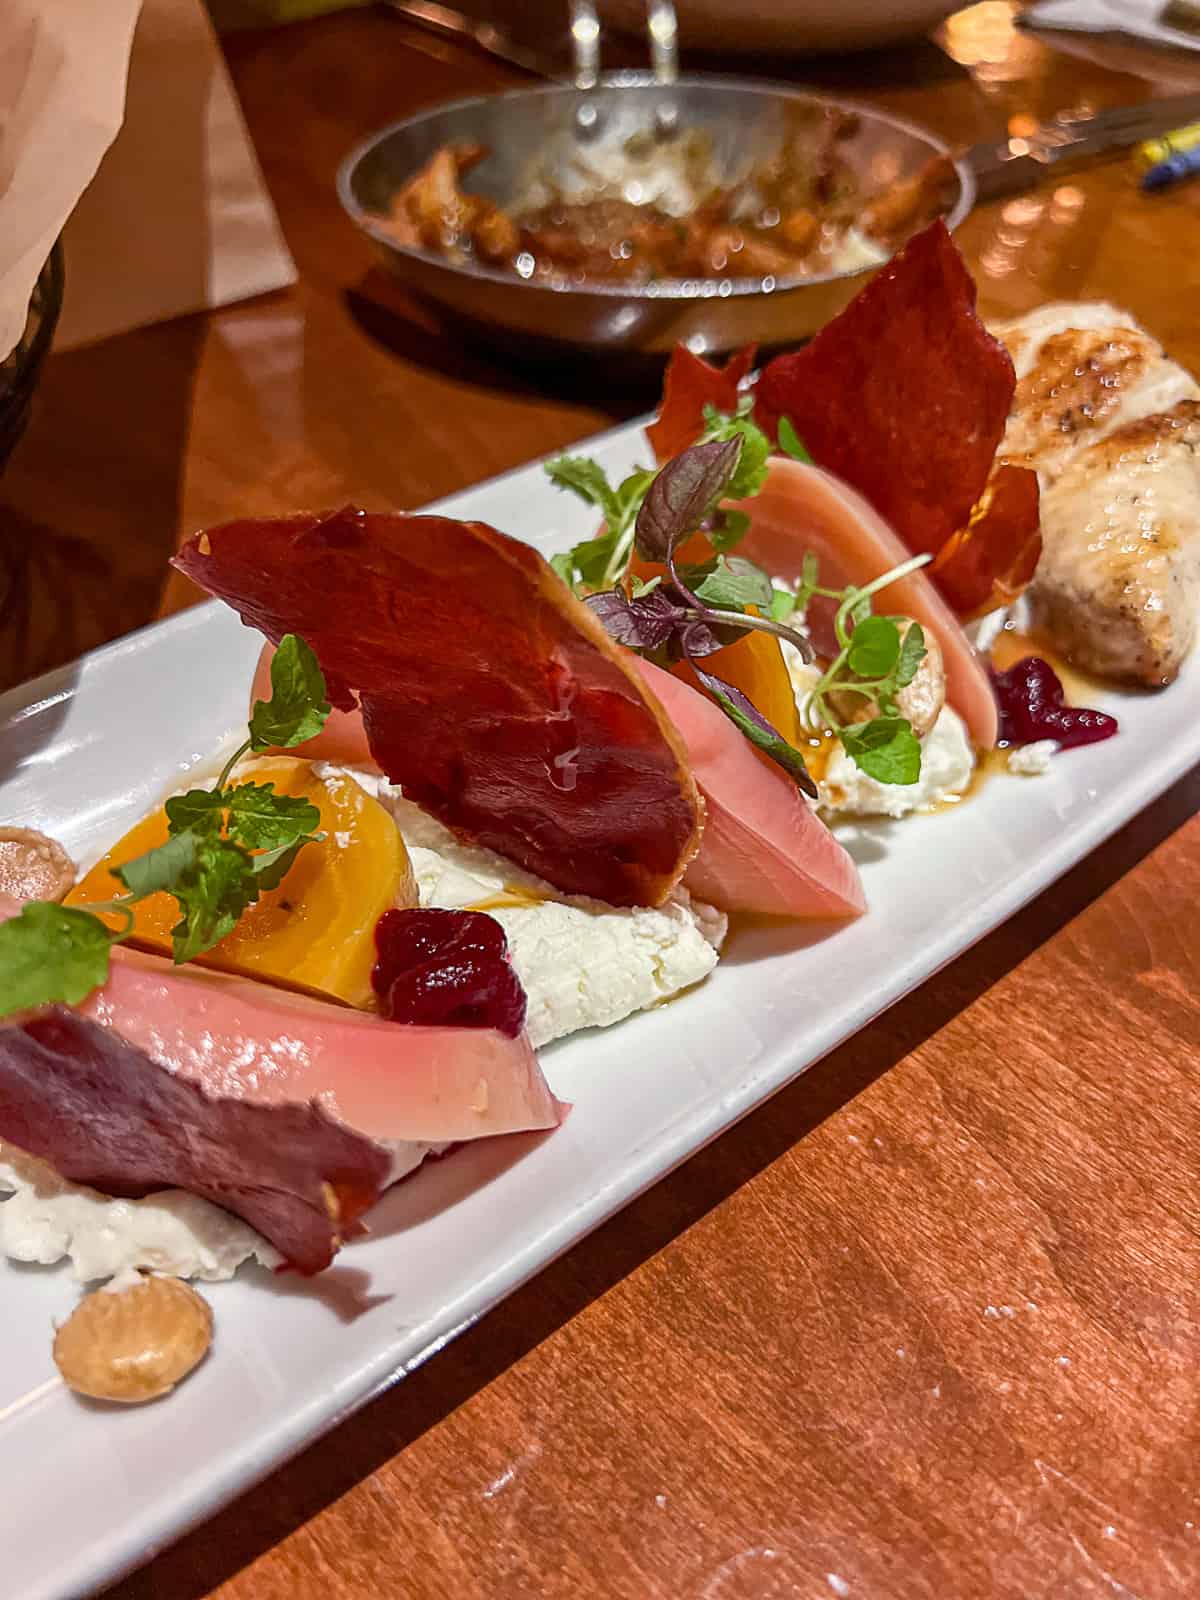 Heirloom Beets and Goat Cheese Salad at Le Cellier Restaurant in Canada Pavilion at Disney World Epcot Park